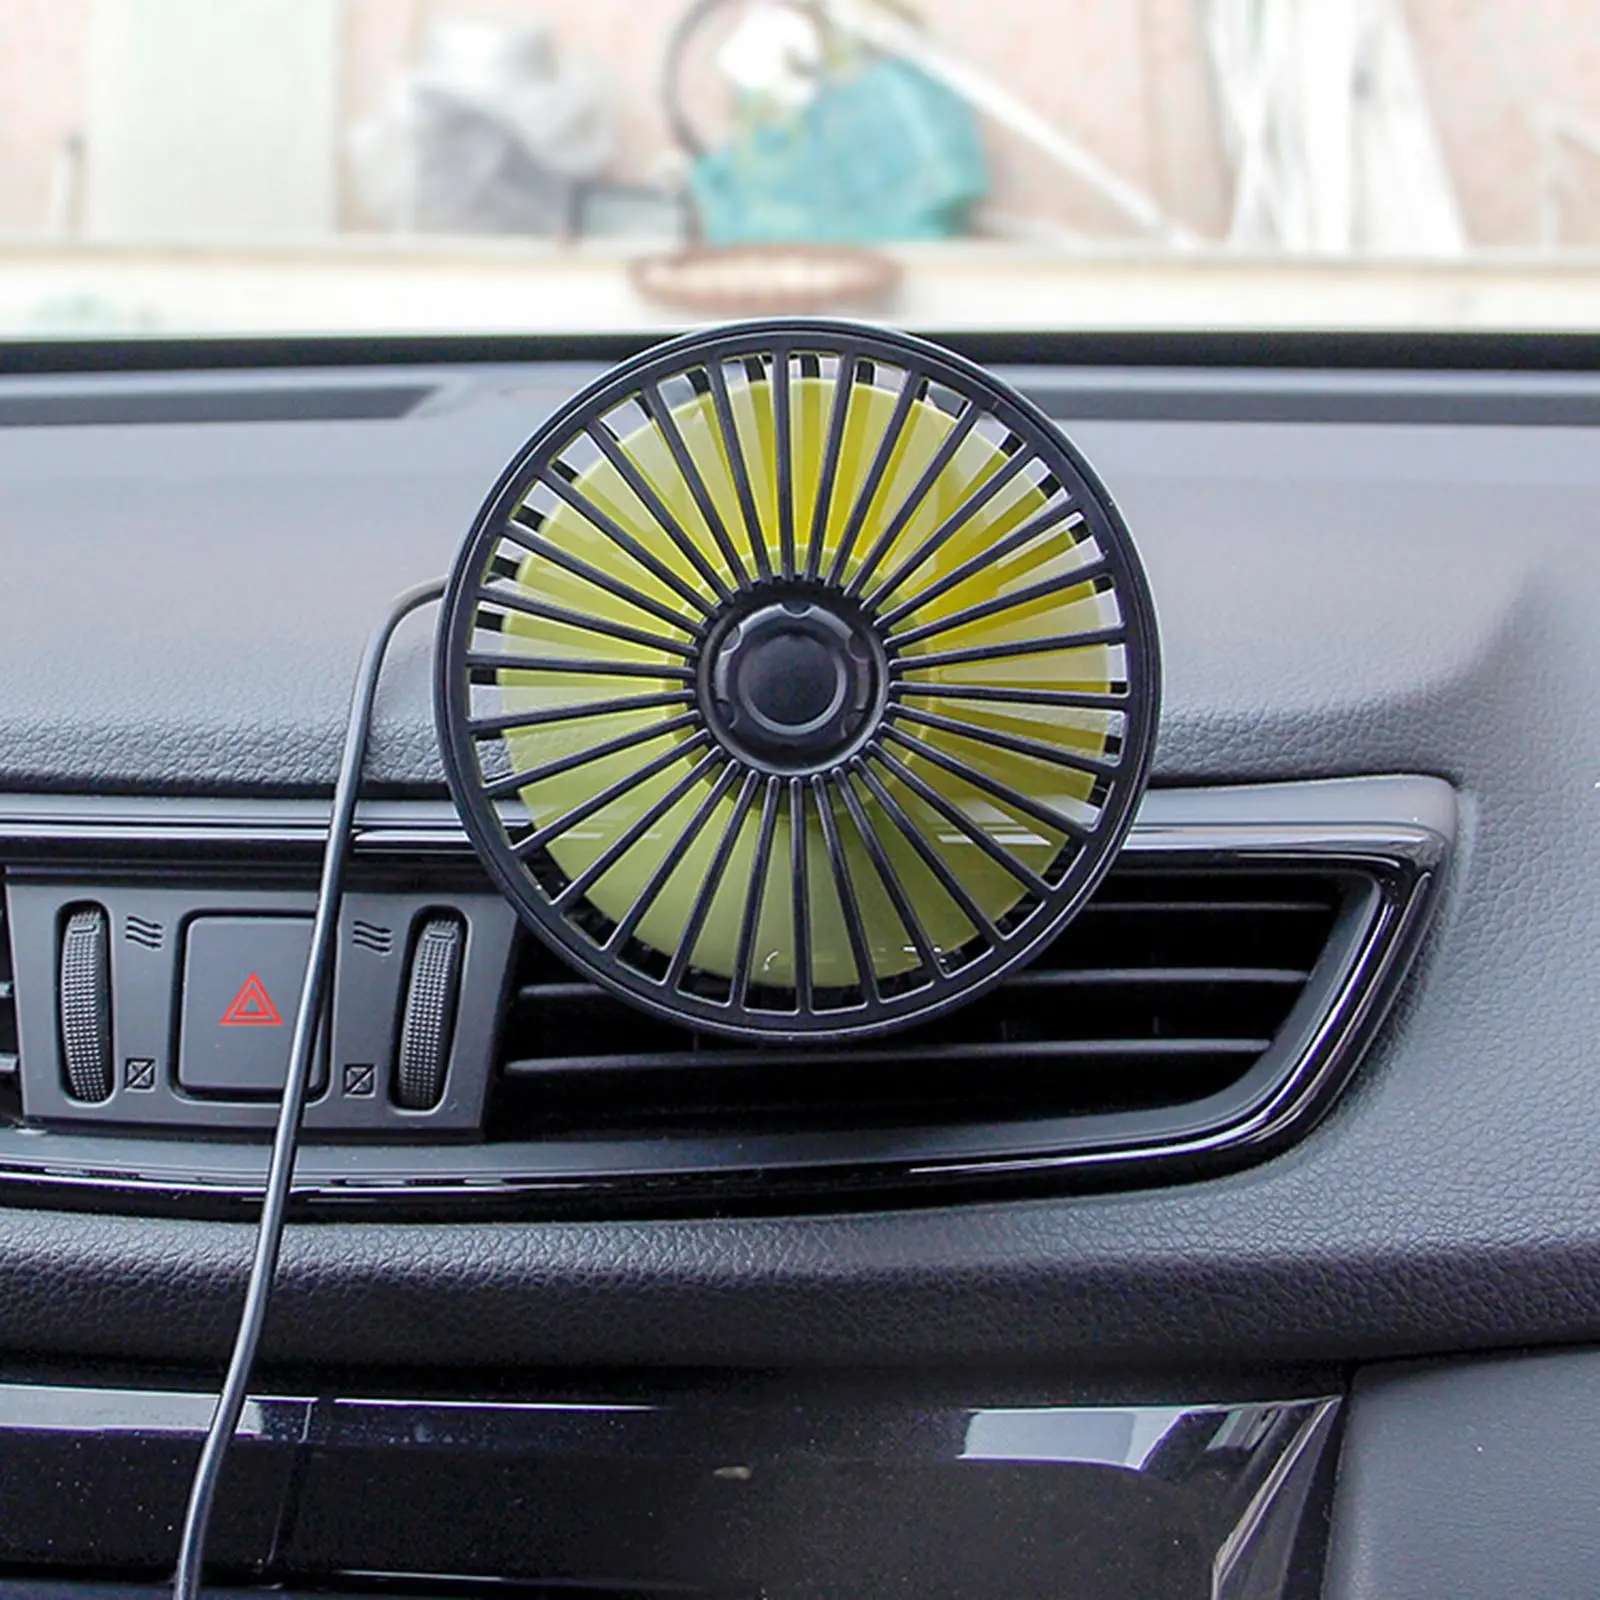 USB Fan Electric Low Noise Suction Cup Cooling Air for Car RV Home